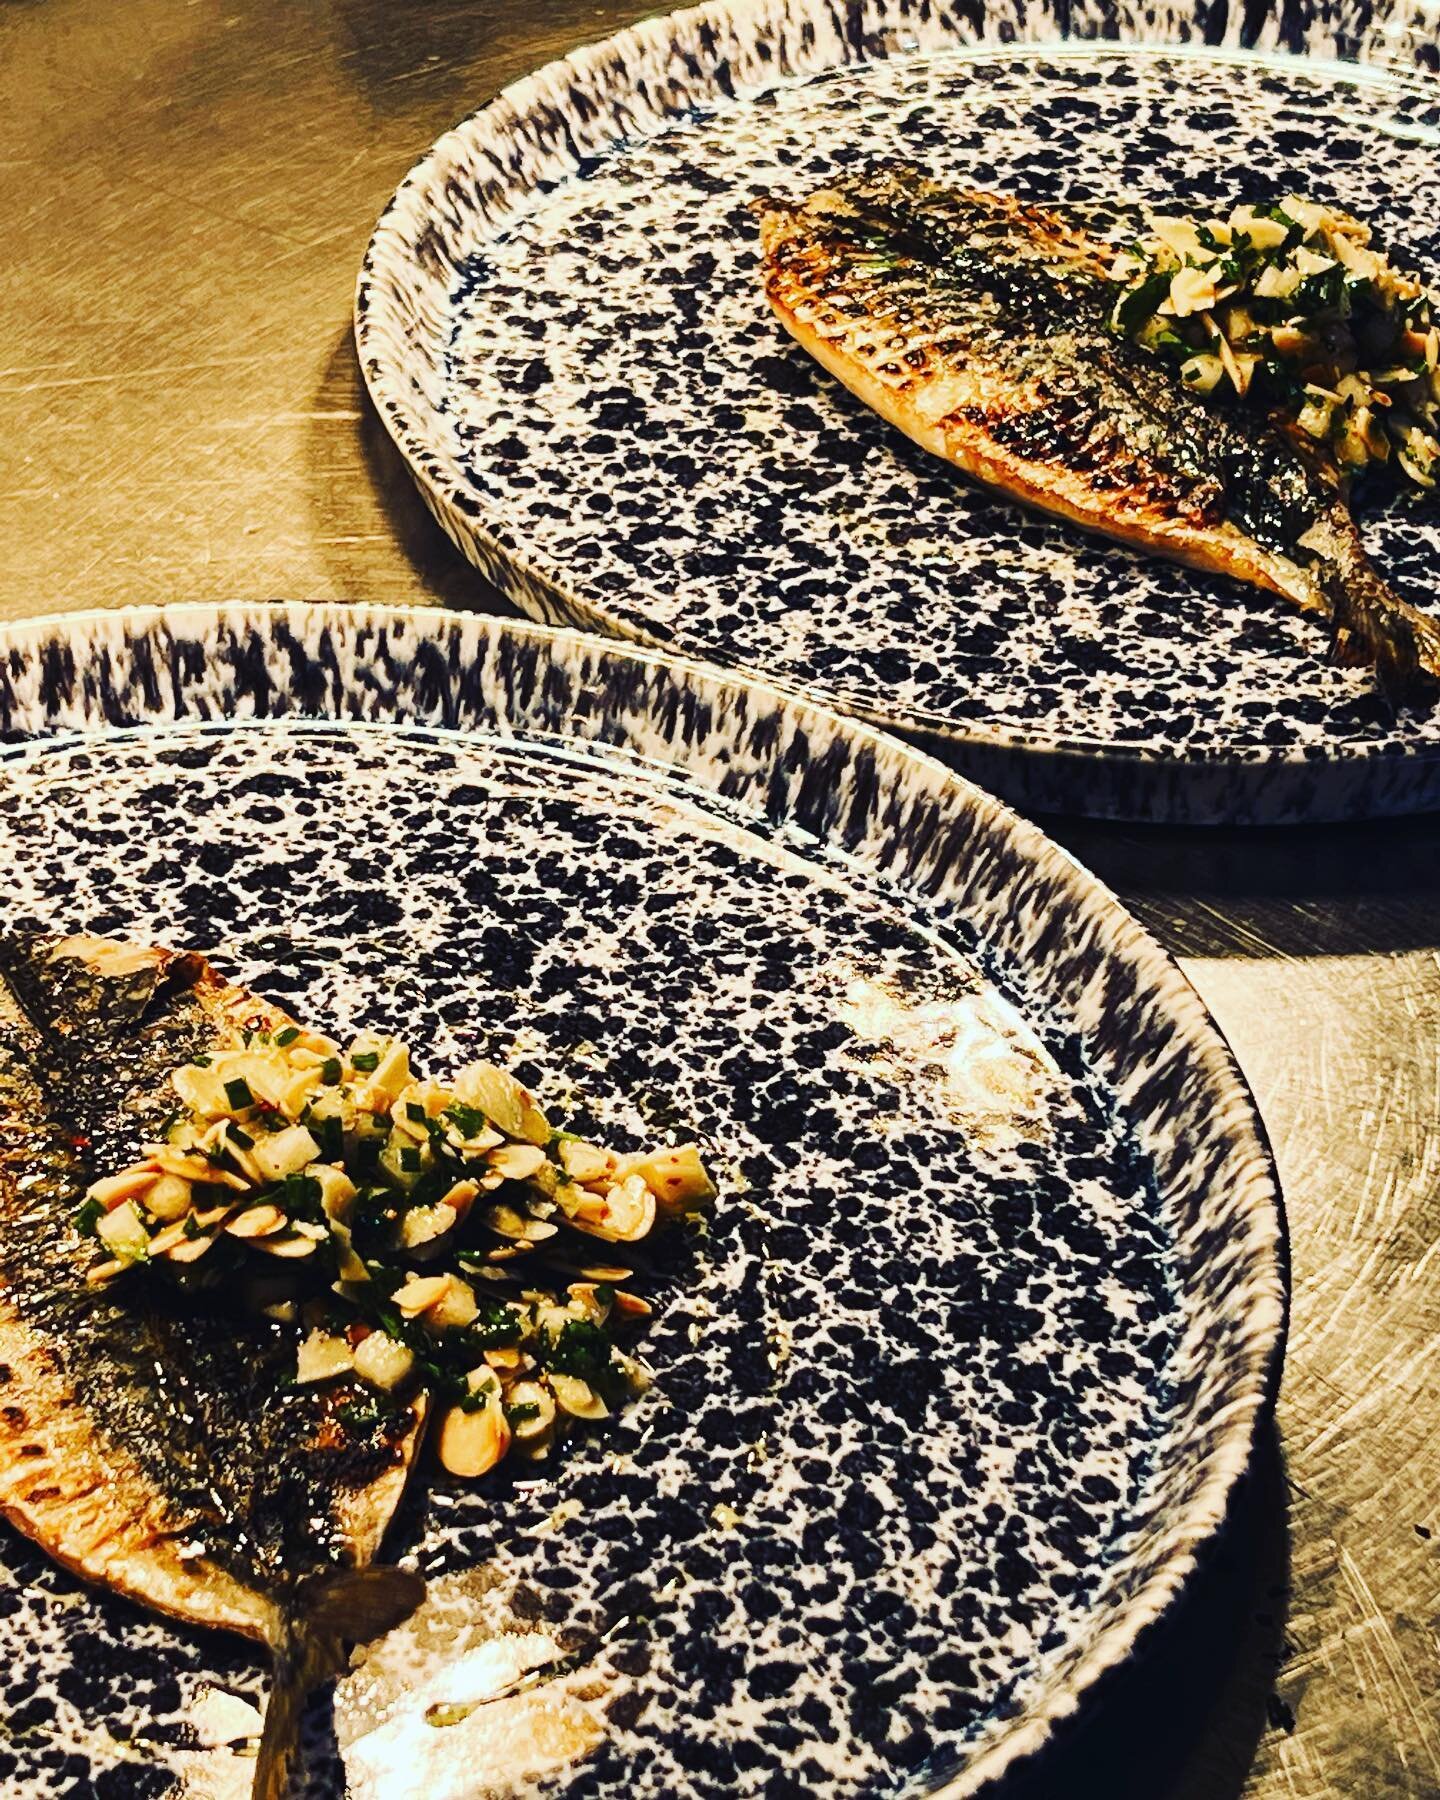 Char Grilled Cornish Mackerel with Pear &amp; Almond Salsa

#villagepub #pubfood #mackerel #pear #michelinguide #yesmichelinguide #food #starter #chargrilled #openflamecooking #lunch #dinner #buckinghamshire #goodfood #yum #instafood